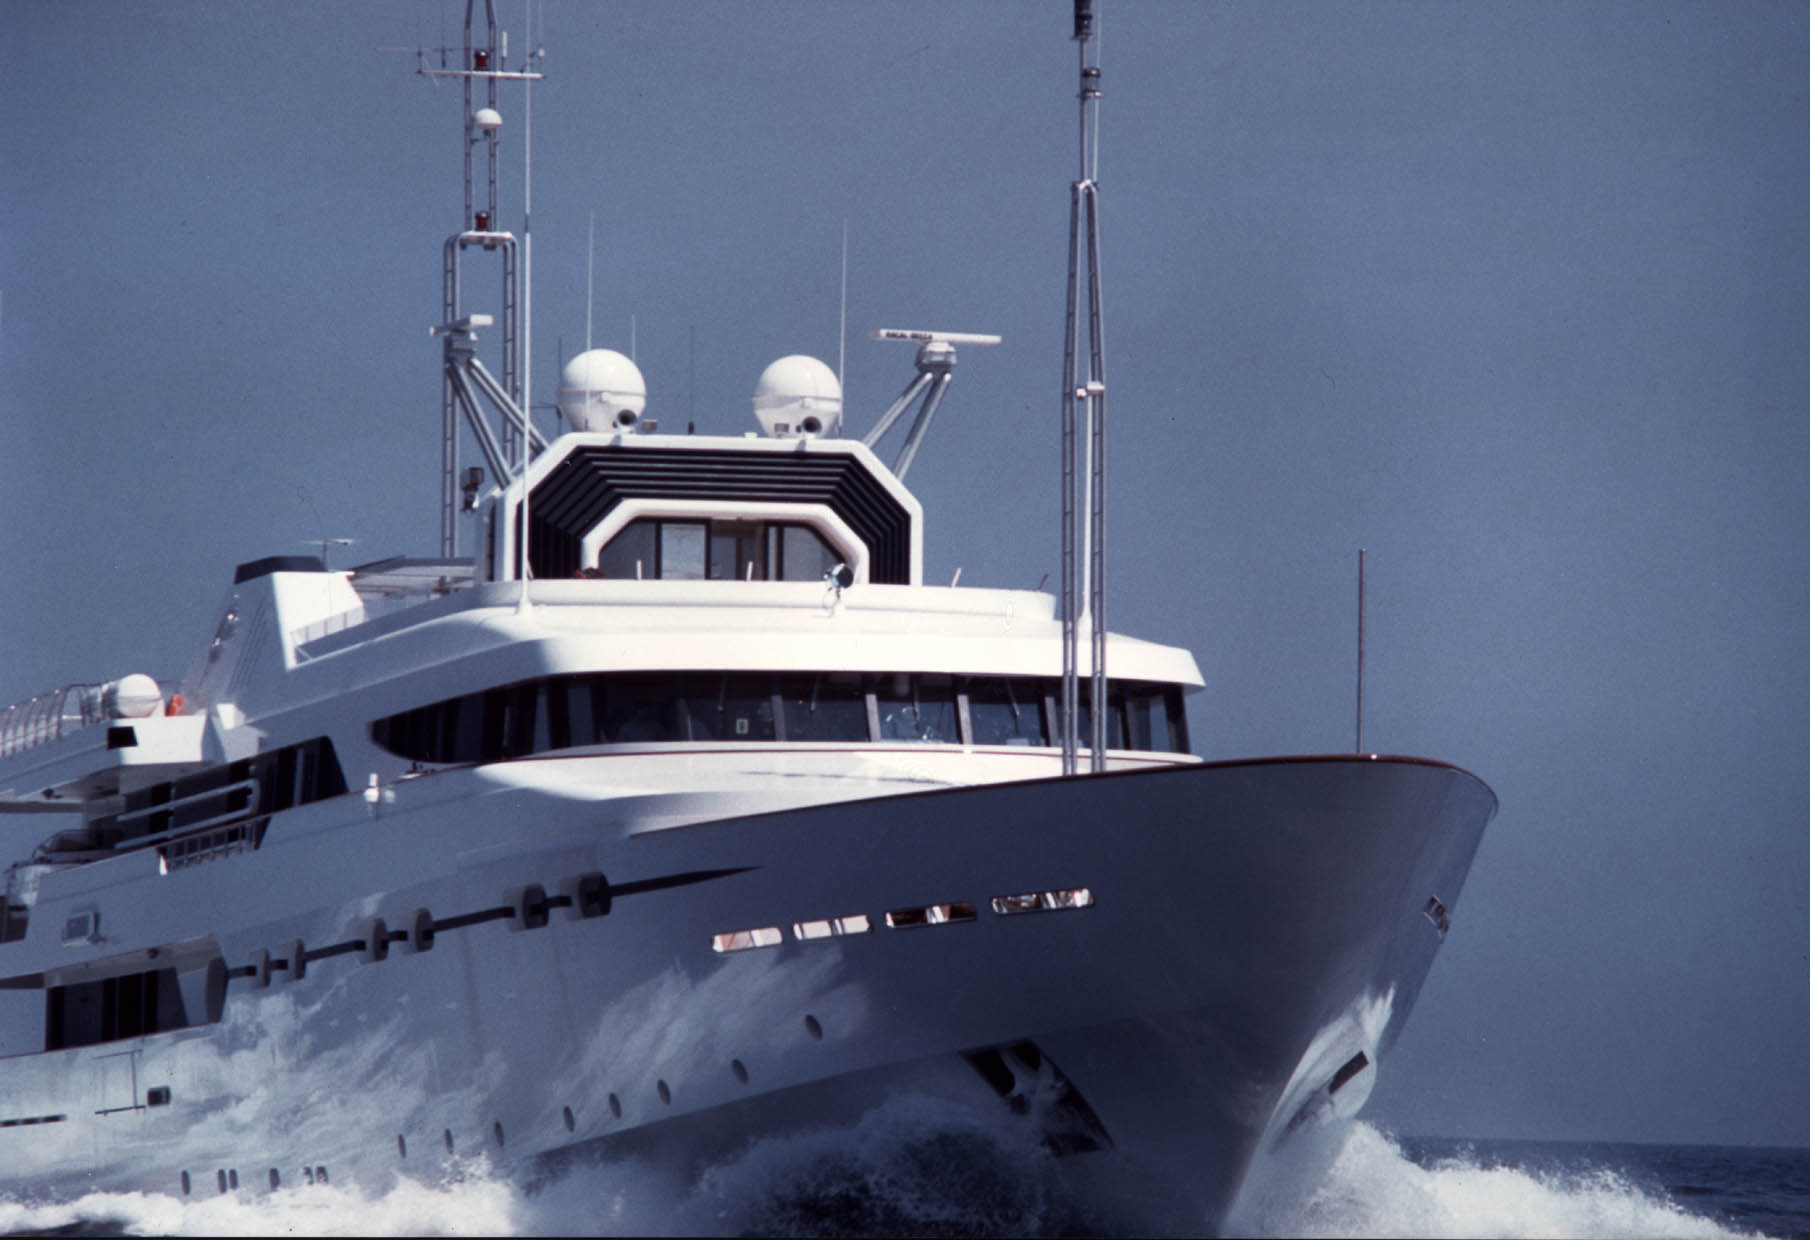 <p>Built for Saudi Arabian Sheikh Hassan Enany in 1986, the 213-foot <em>Il Vagabondo</em> is an early Terence Disdale design with a contemporary feel. The British designer penned the boat’s exterior and interior, which included the first guest elevator aboard a yacht. Il Vagabondo also highlighted CRN’s expertise in building custom steel-hulled yachts, with the naval architecture done in-house.</p>